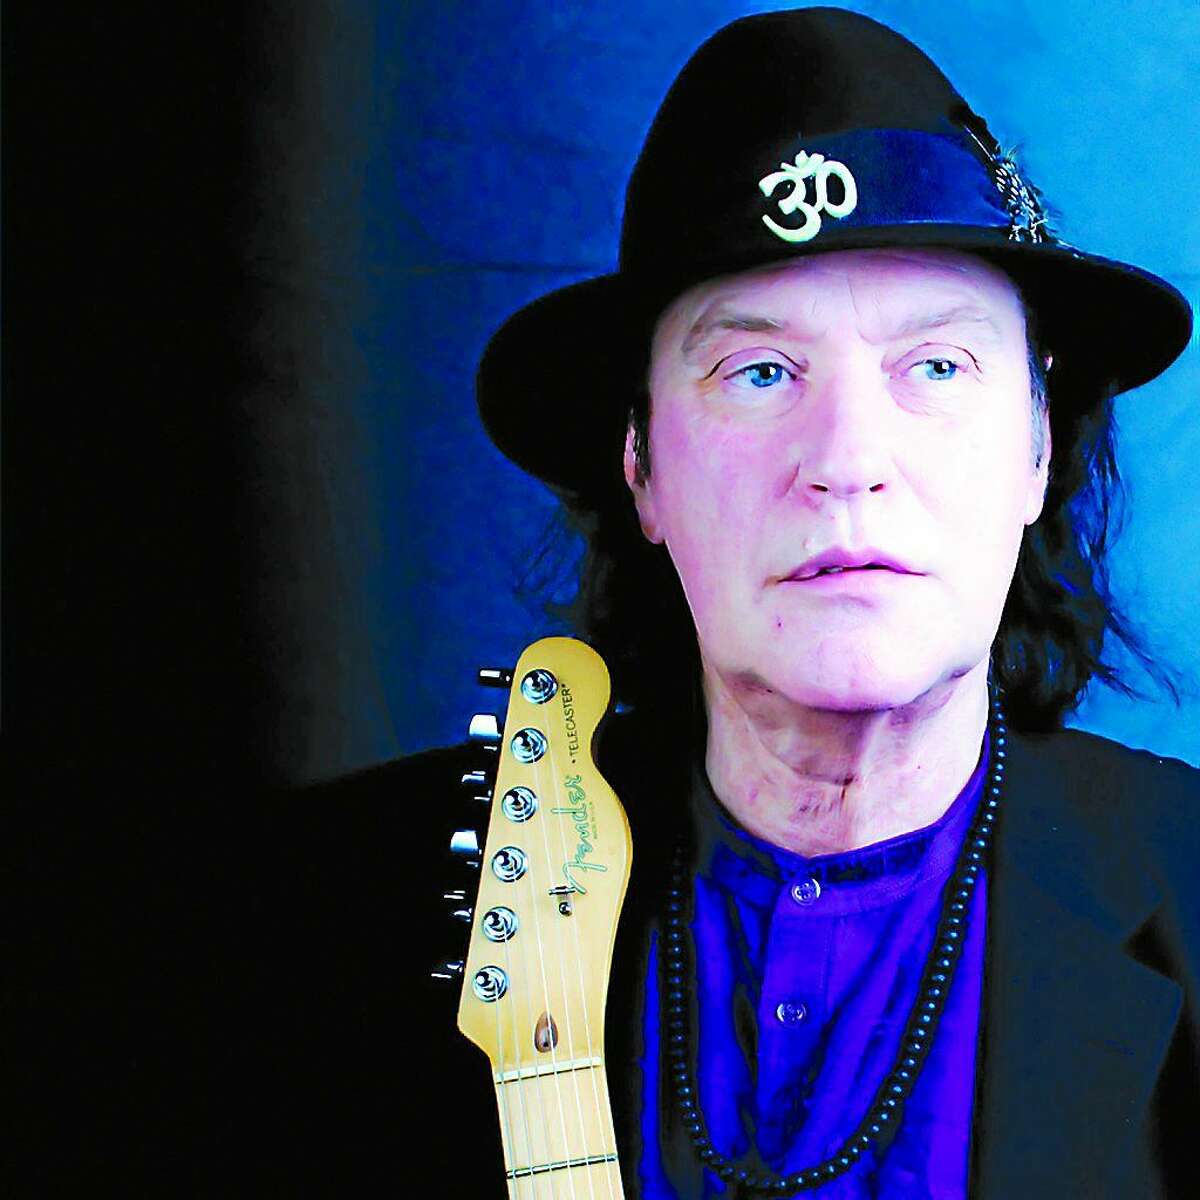 Of course, Kinks founder Dave Davies is a member of the Rock and Roll Hall of Fame.